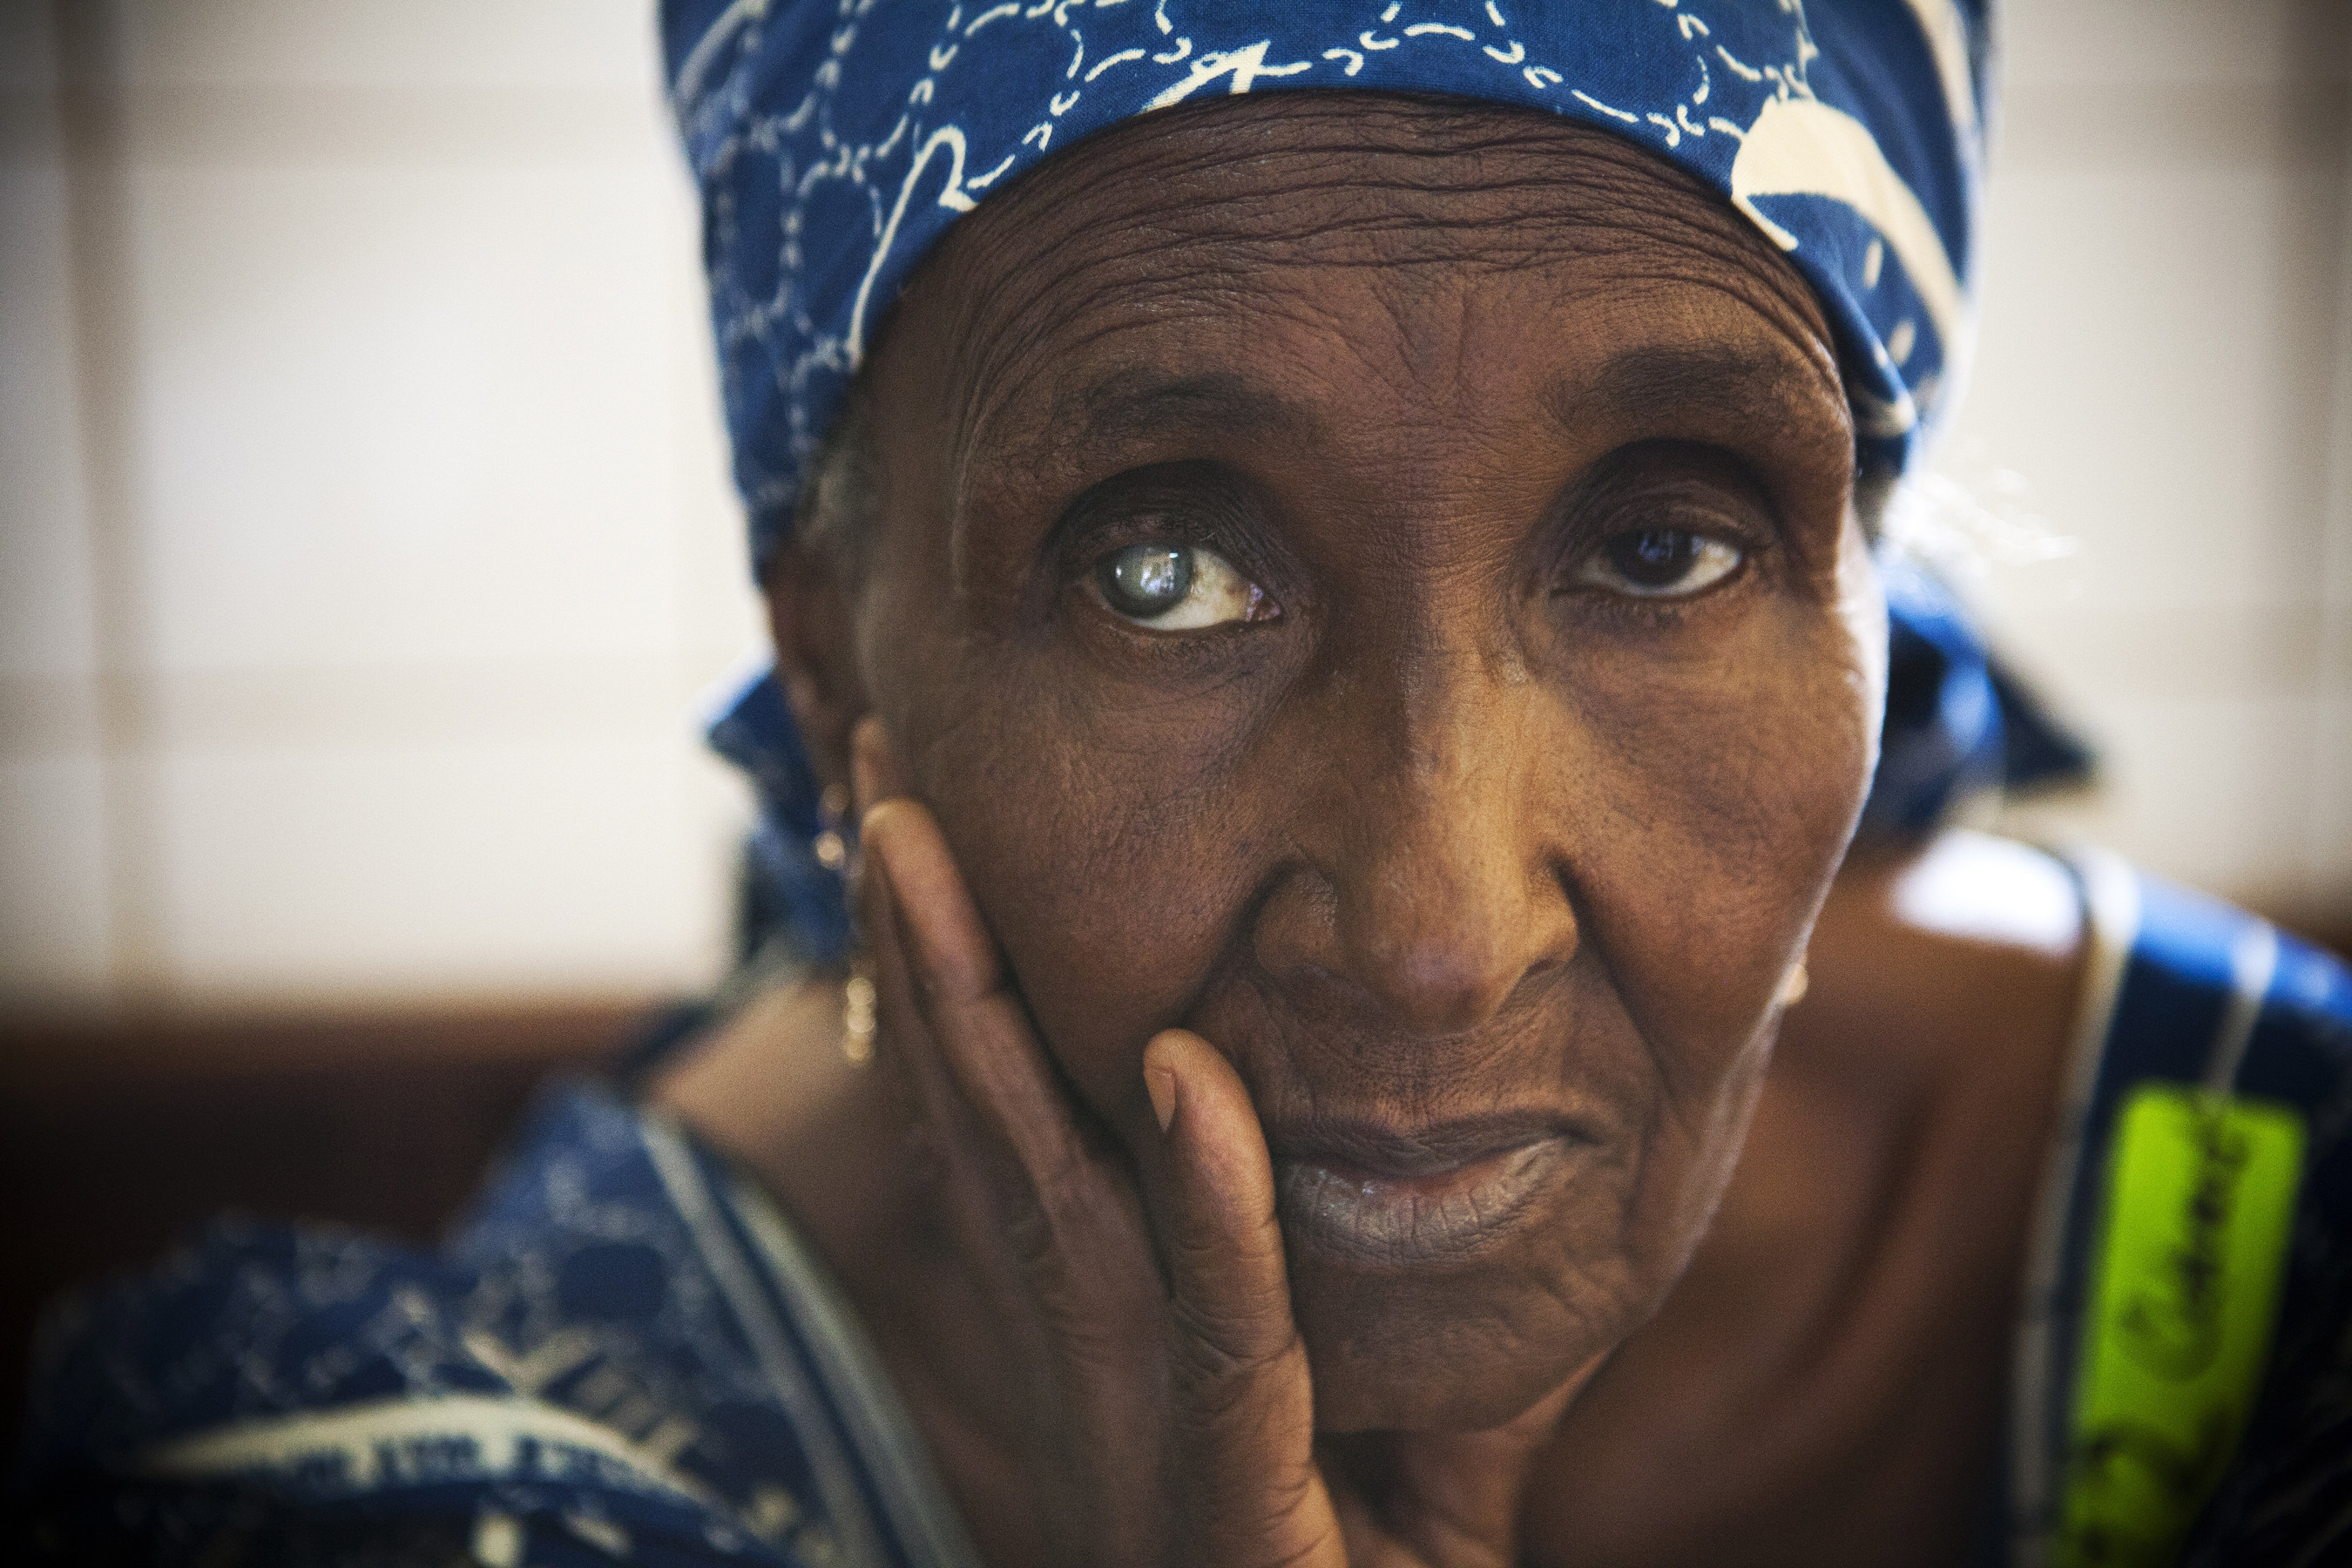 Aissatou, 61, whose vision loss has caused her to give up her livelihood of herding cattle, awaits a medical screening of her cataract at a hospital in Cameroon. Learn more: orbis.org